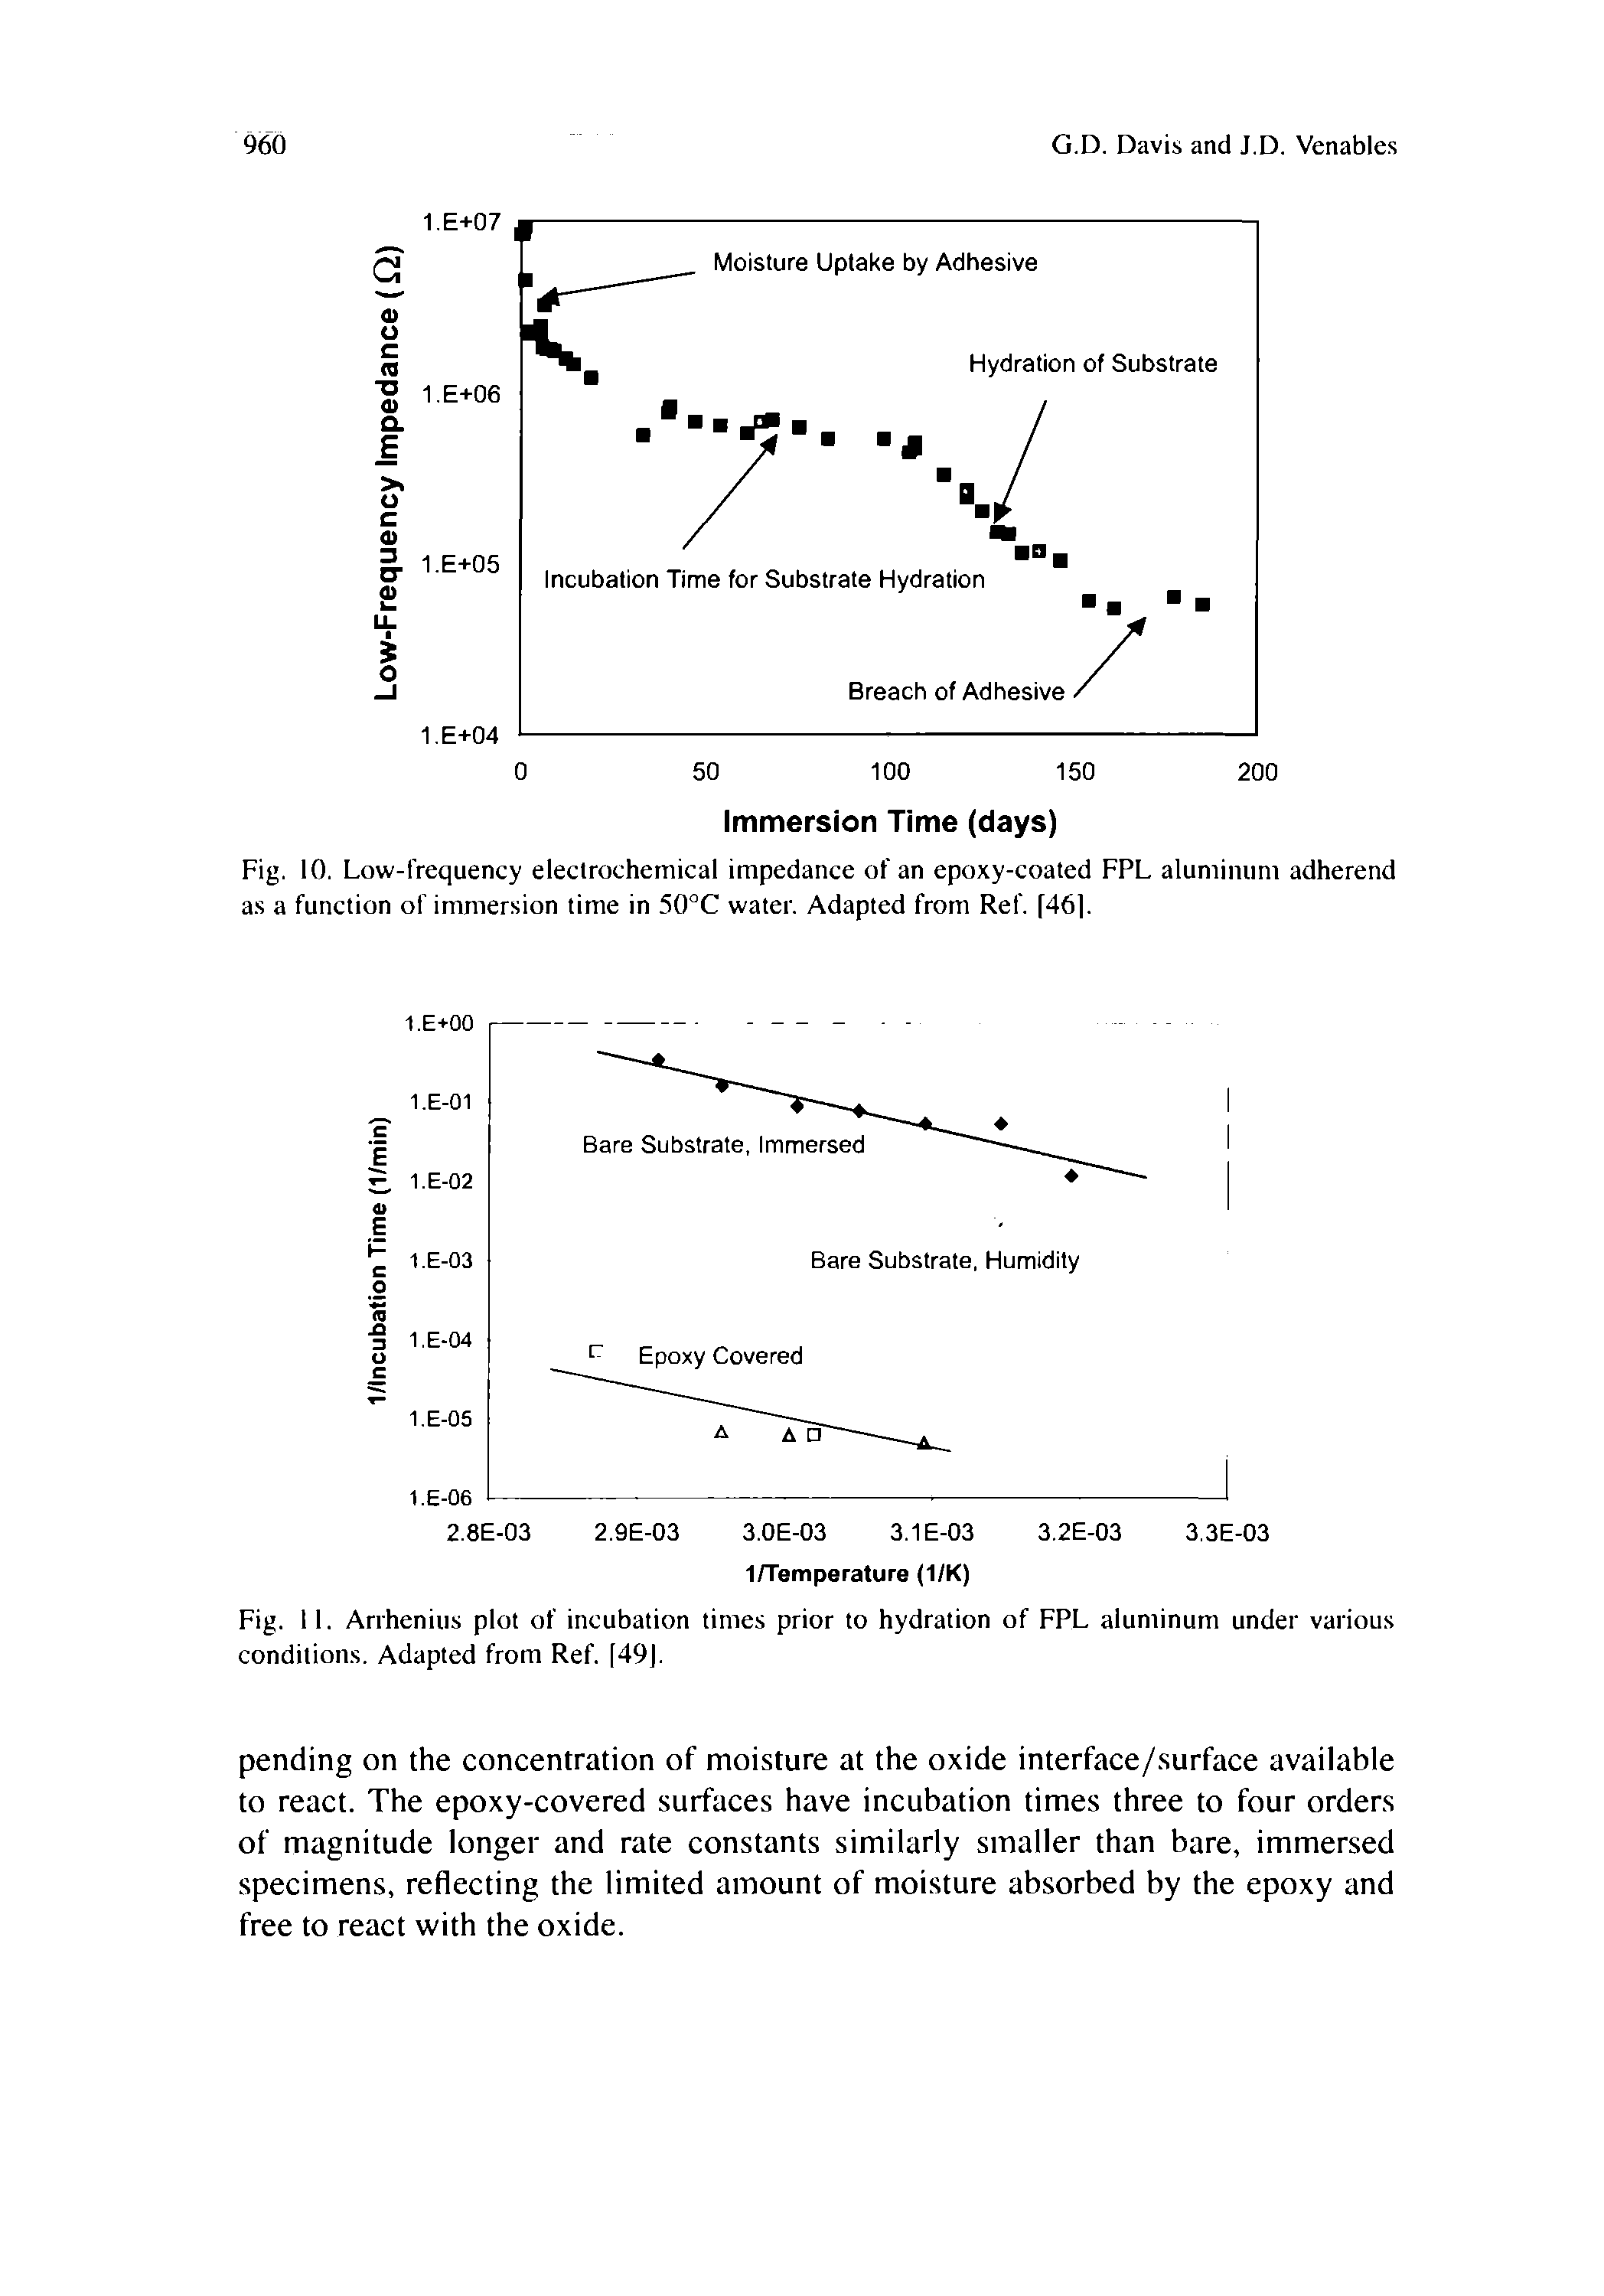 Fig. 10. Low-frequency electrochemical impedance of an epoxy-coated FPL aluminum adherend as a function of immersion time in 50°C water. Adapted from Ref. [46].